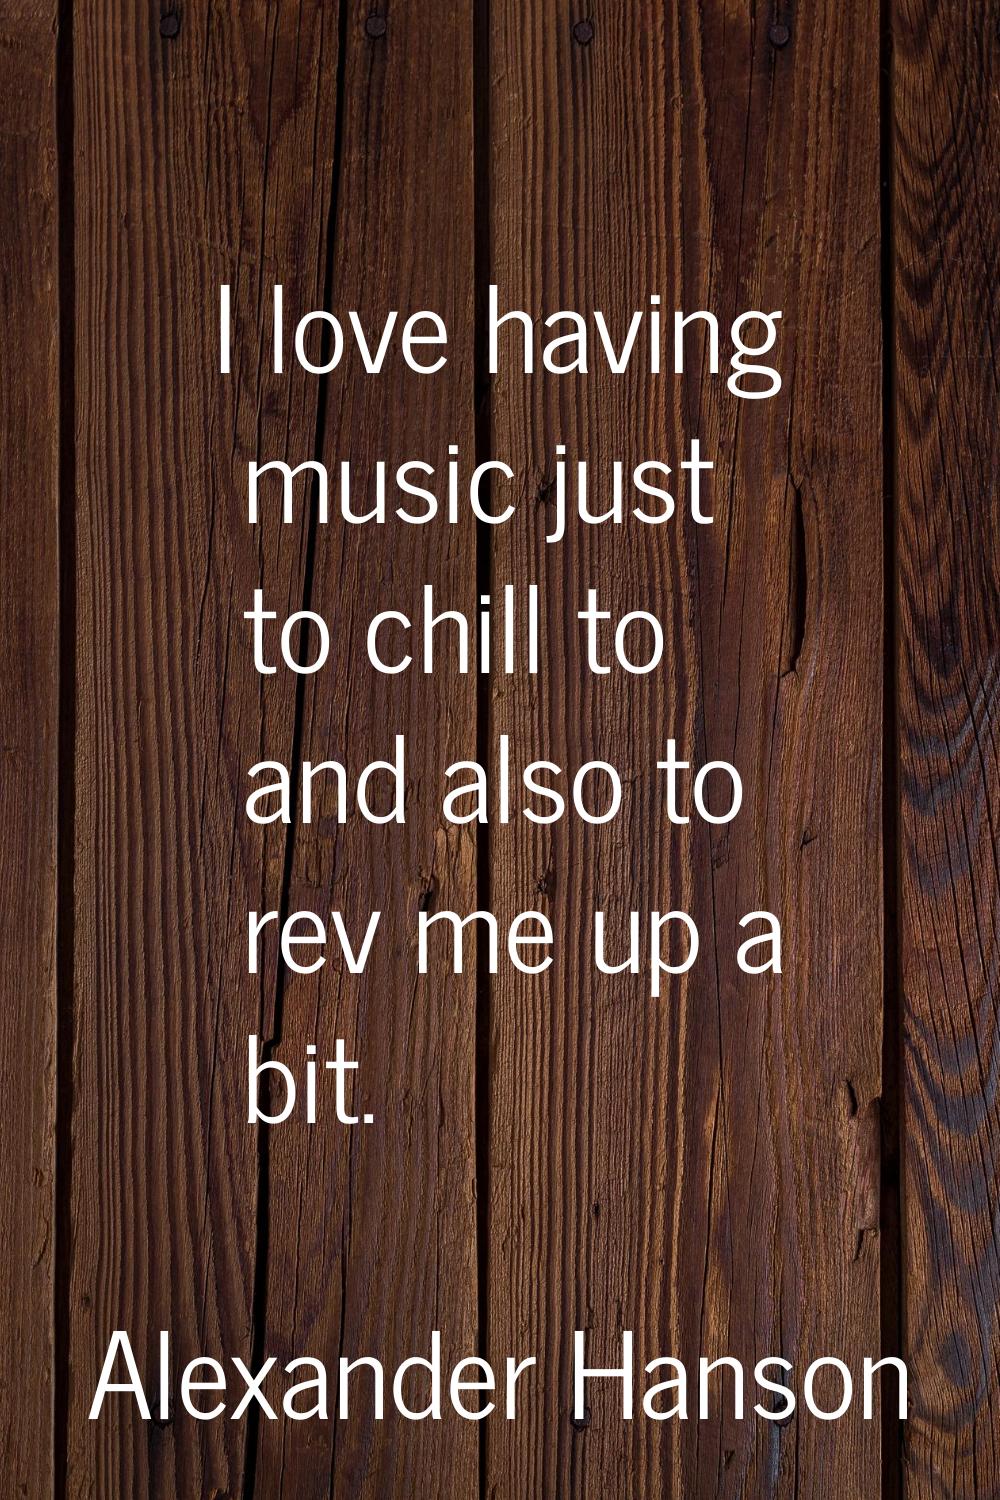 I love having music just to chill to and also to rev me up a bit.